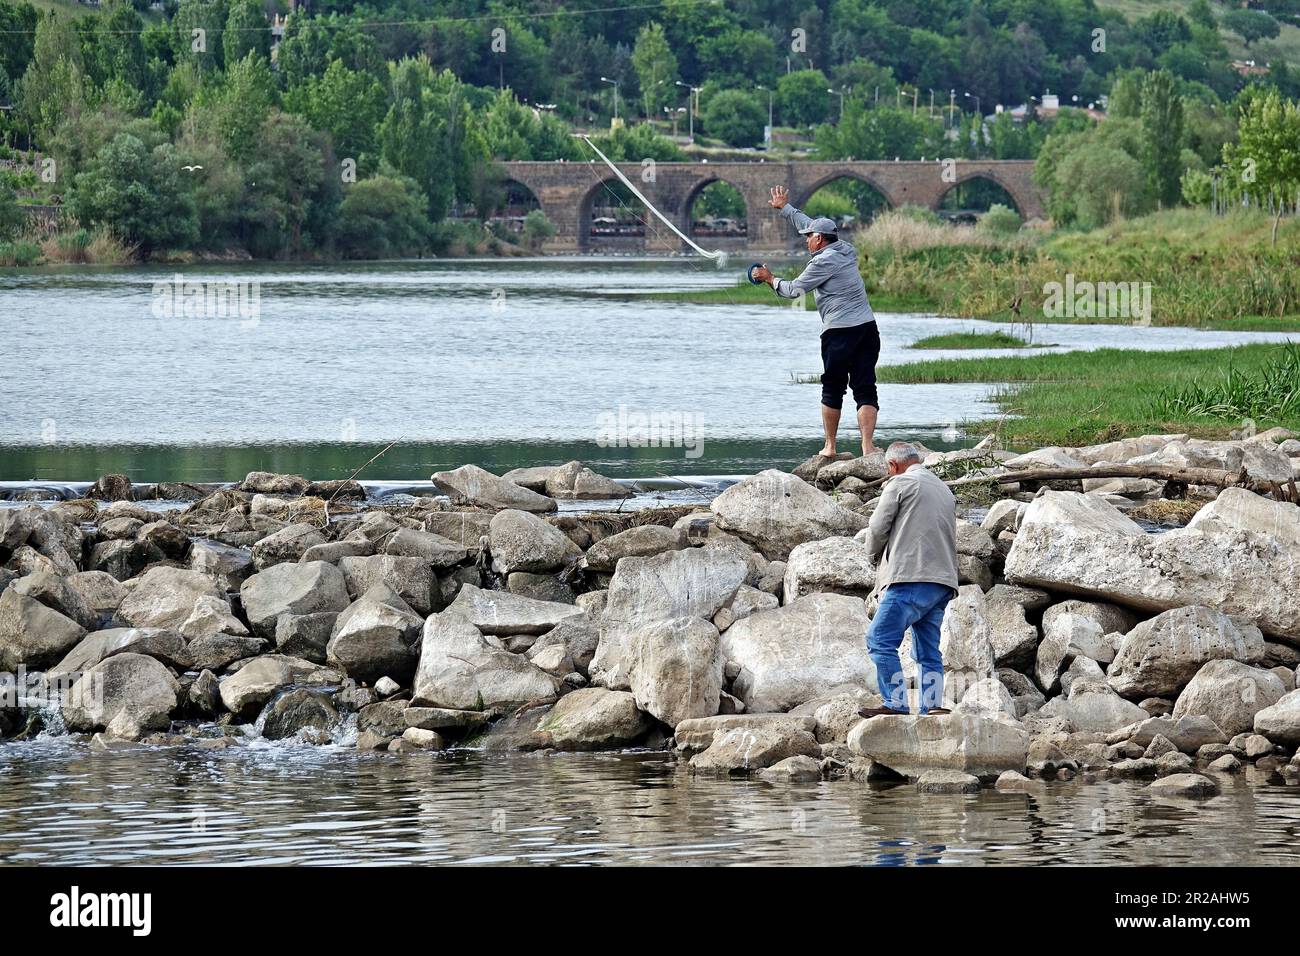 https://c8.alamy.com/comp/2R2AHW5/a-fisherman-is-seen-throwing-his-net-in-tigris-river-in-diyarbakir-it-is-possible-to-see-people-fishing-with-a-net-or-line-at-any-time-of-the-day-on-the-banks-of-the-tigris-river-some-of-the-fishermen-fish-to-sell-them-while-others-take-it-home-for-food-the-tigris-river-which-originates-from-the-southeastern-region-of-turkey-reaches-the-persian-gulf-by-passing-through-the-territory-of-iraq-the-river-spreads-blessings-to-the-countries-it-passes-through-with-both-fishing-and-agricultural-irrigation-photo-by-mehmet-masum-suersopa-imagessipa-usa-2R2AHW5.jpg